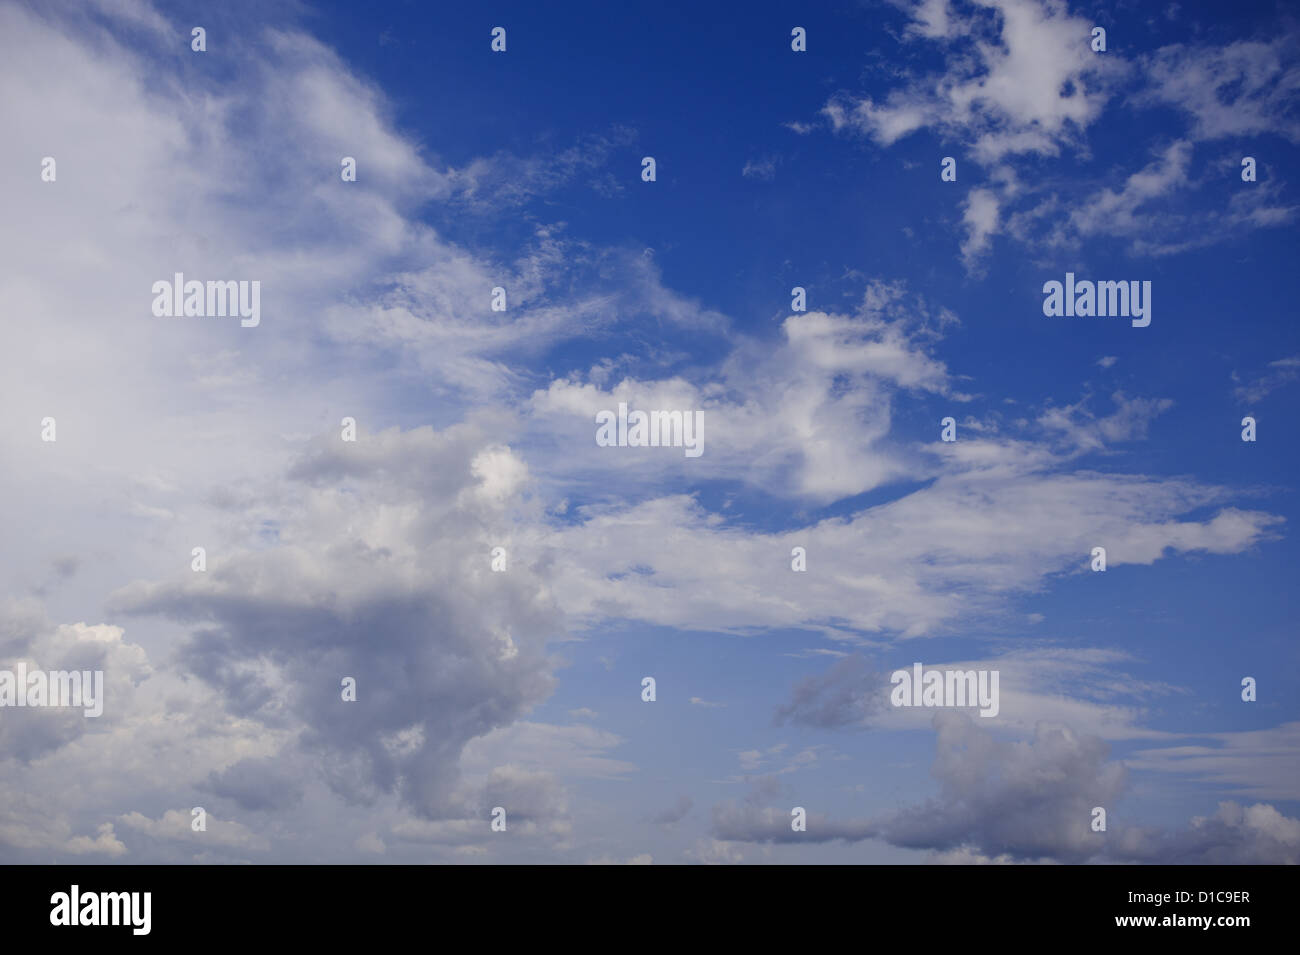 Blue sky with white clouds and shades of gray. Lovely and peaceful moment in Indonesia Stock Photo